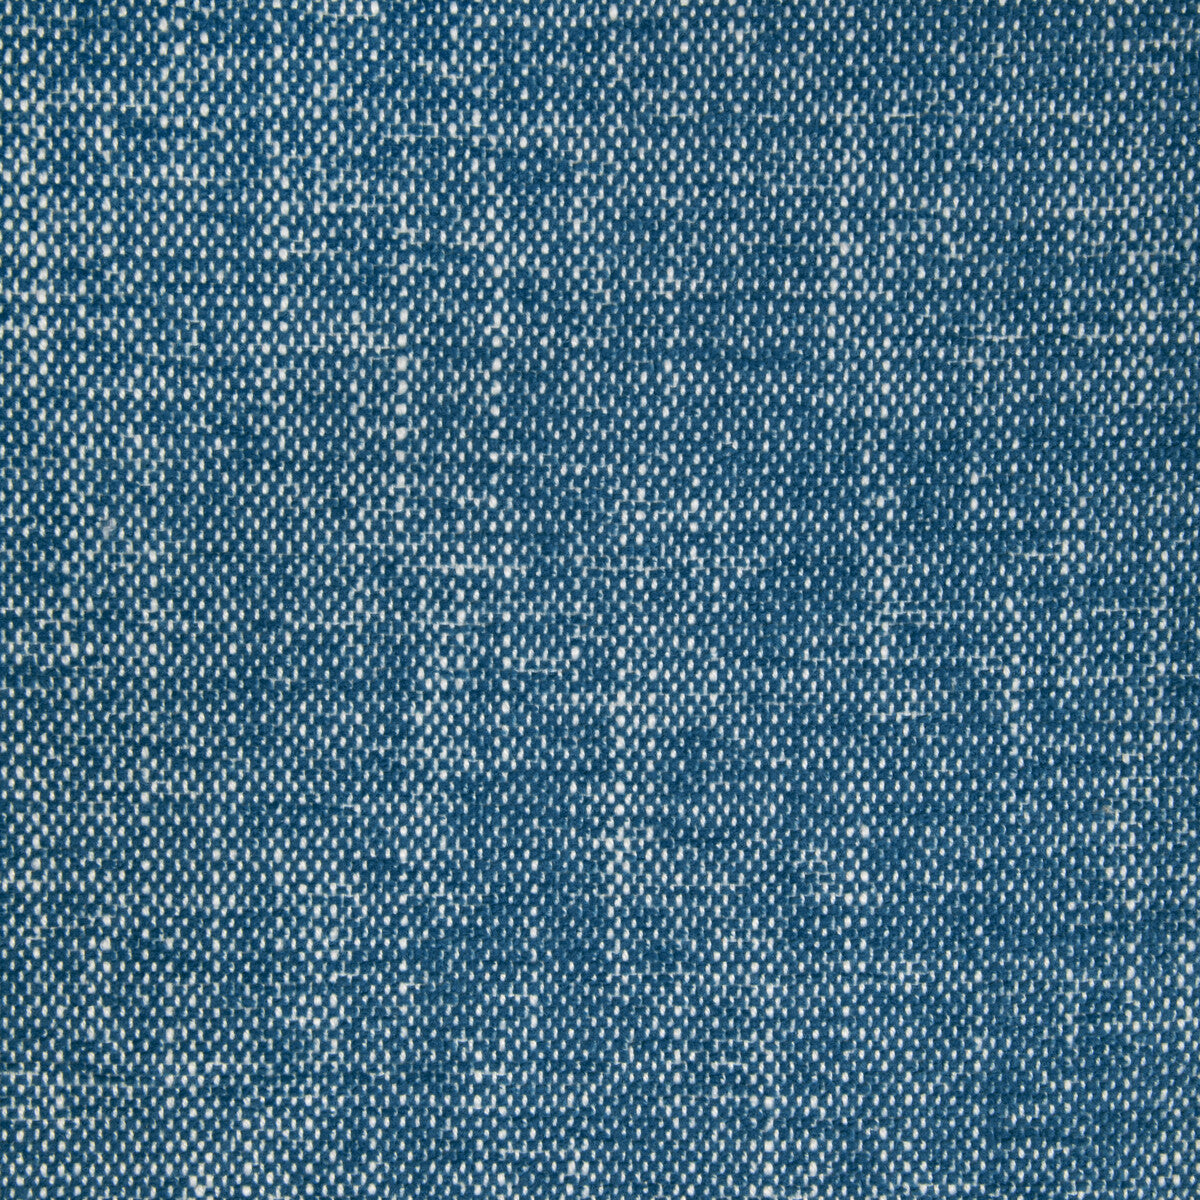 Kravet Smart-36885 fabric in 505 color - pattern 36885.505.0 - by Kravet Smart in the Inside Out Performance Fabrics collection